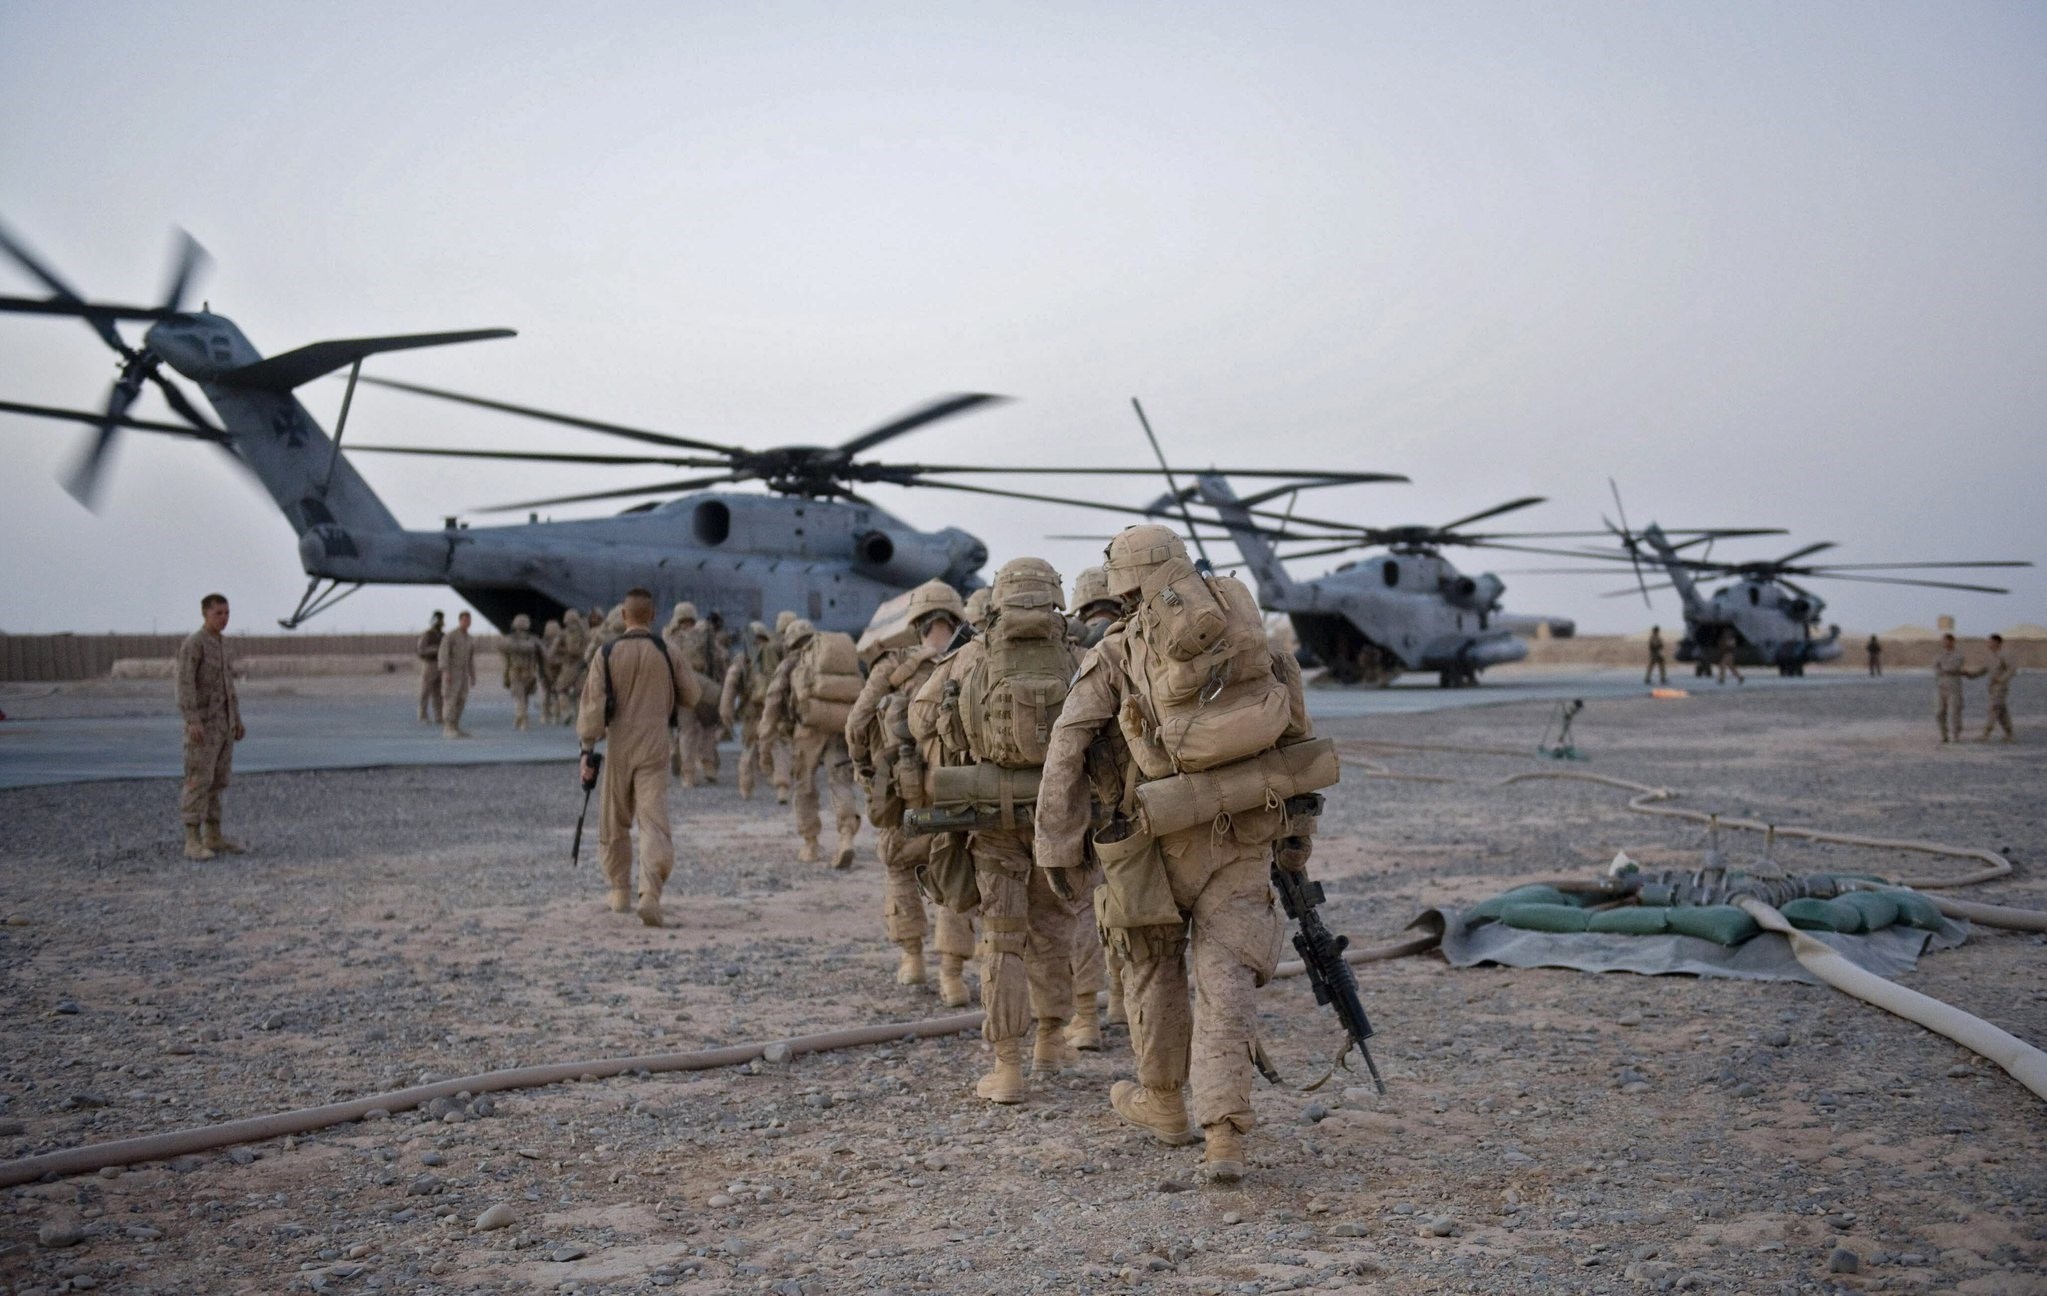 US Marines walk towards the helicopter as part of Operation Khanjar at Camp Dwyer in Helmand Province in Afghanistan on July 2, 2009. (AFP)